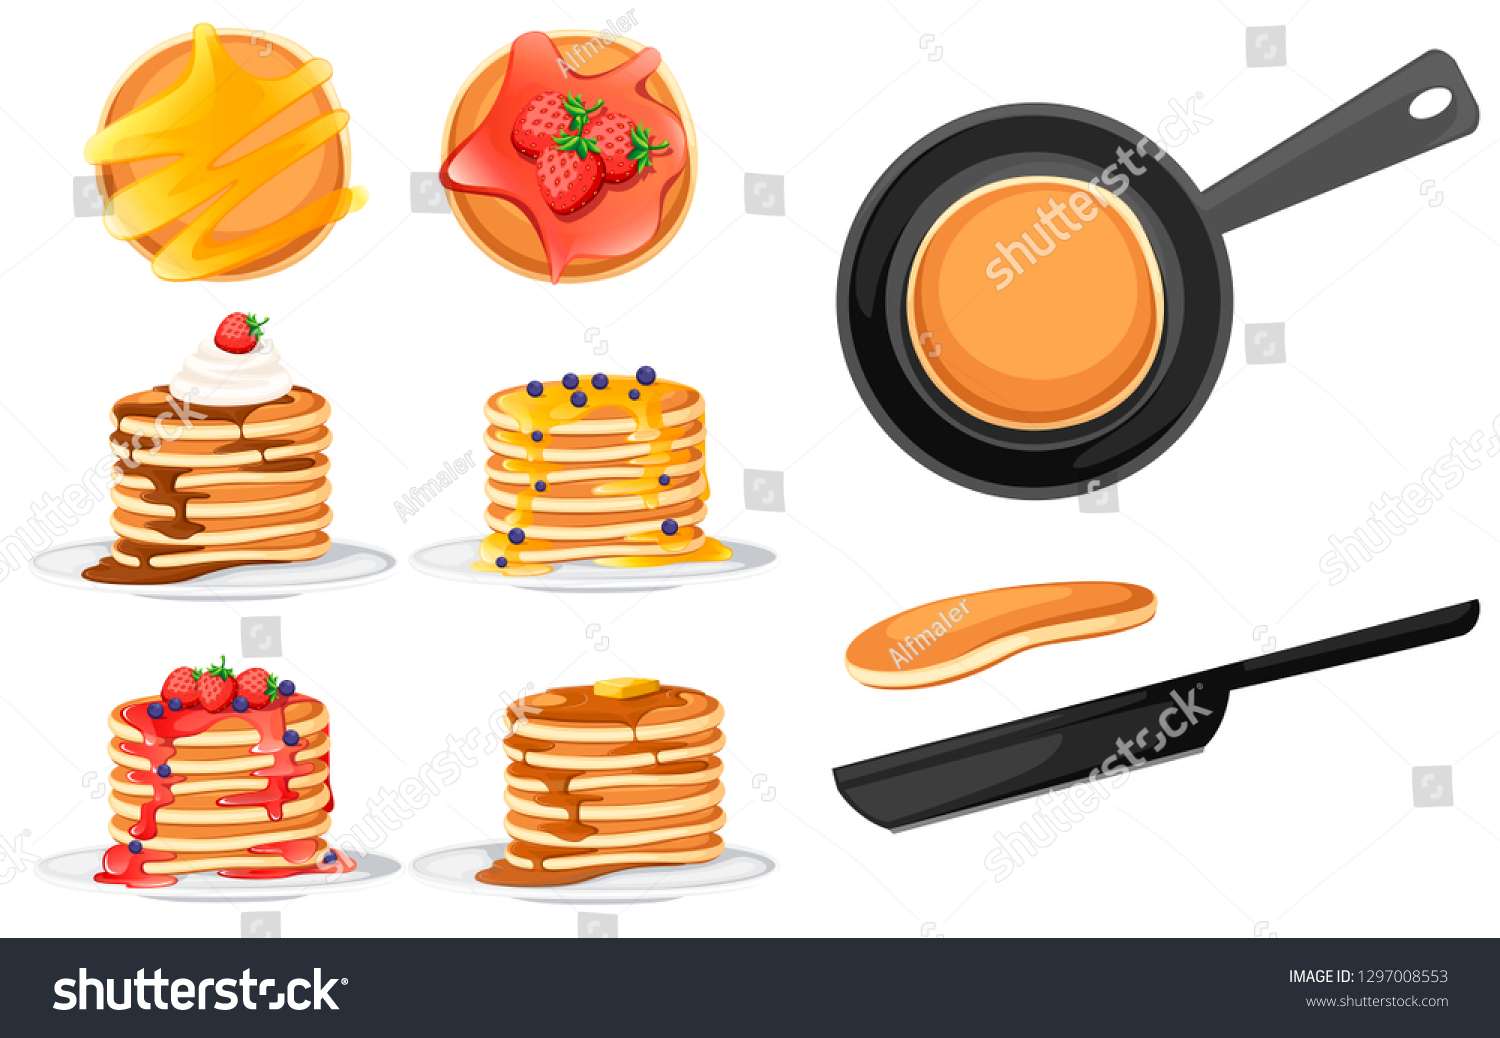 SVG of Set of four pancakes with different toppings. Pancakes on white plate. Baking with syrup or honey. Breakfast concept. Fluffy pancake in frying pan. Flat vector illustration on white background. svg